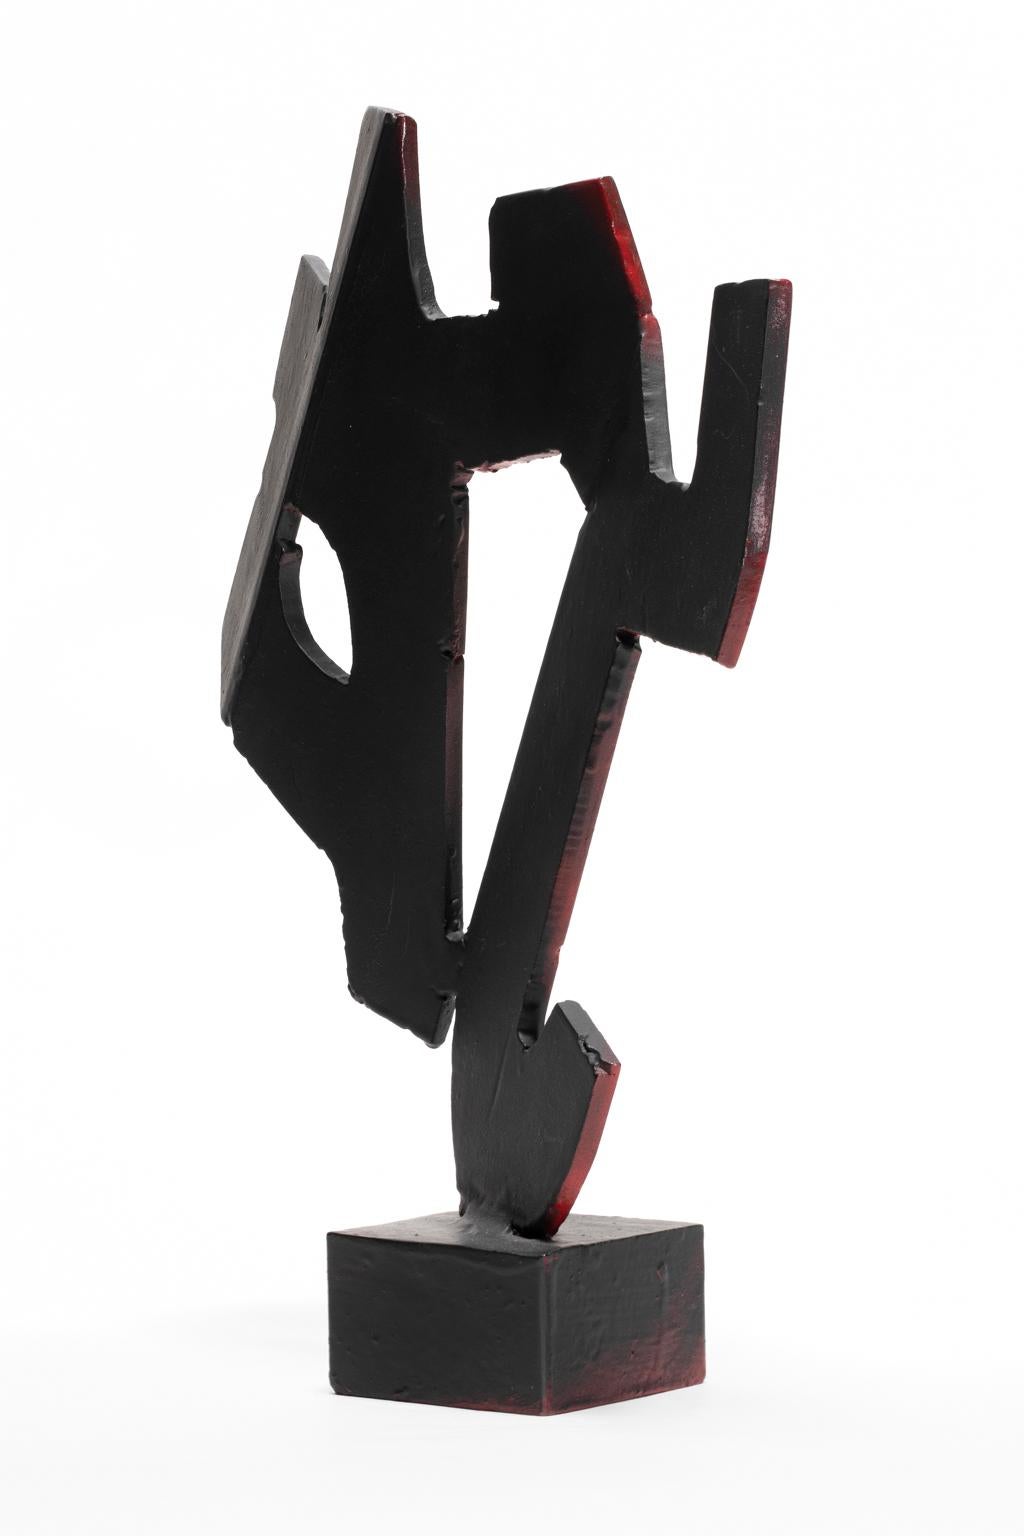 Tony Rosenthal Abstract Sculpture Blackened Steel Red Blushes In Good Condition For Sale In Bloomfield Hills, MI